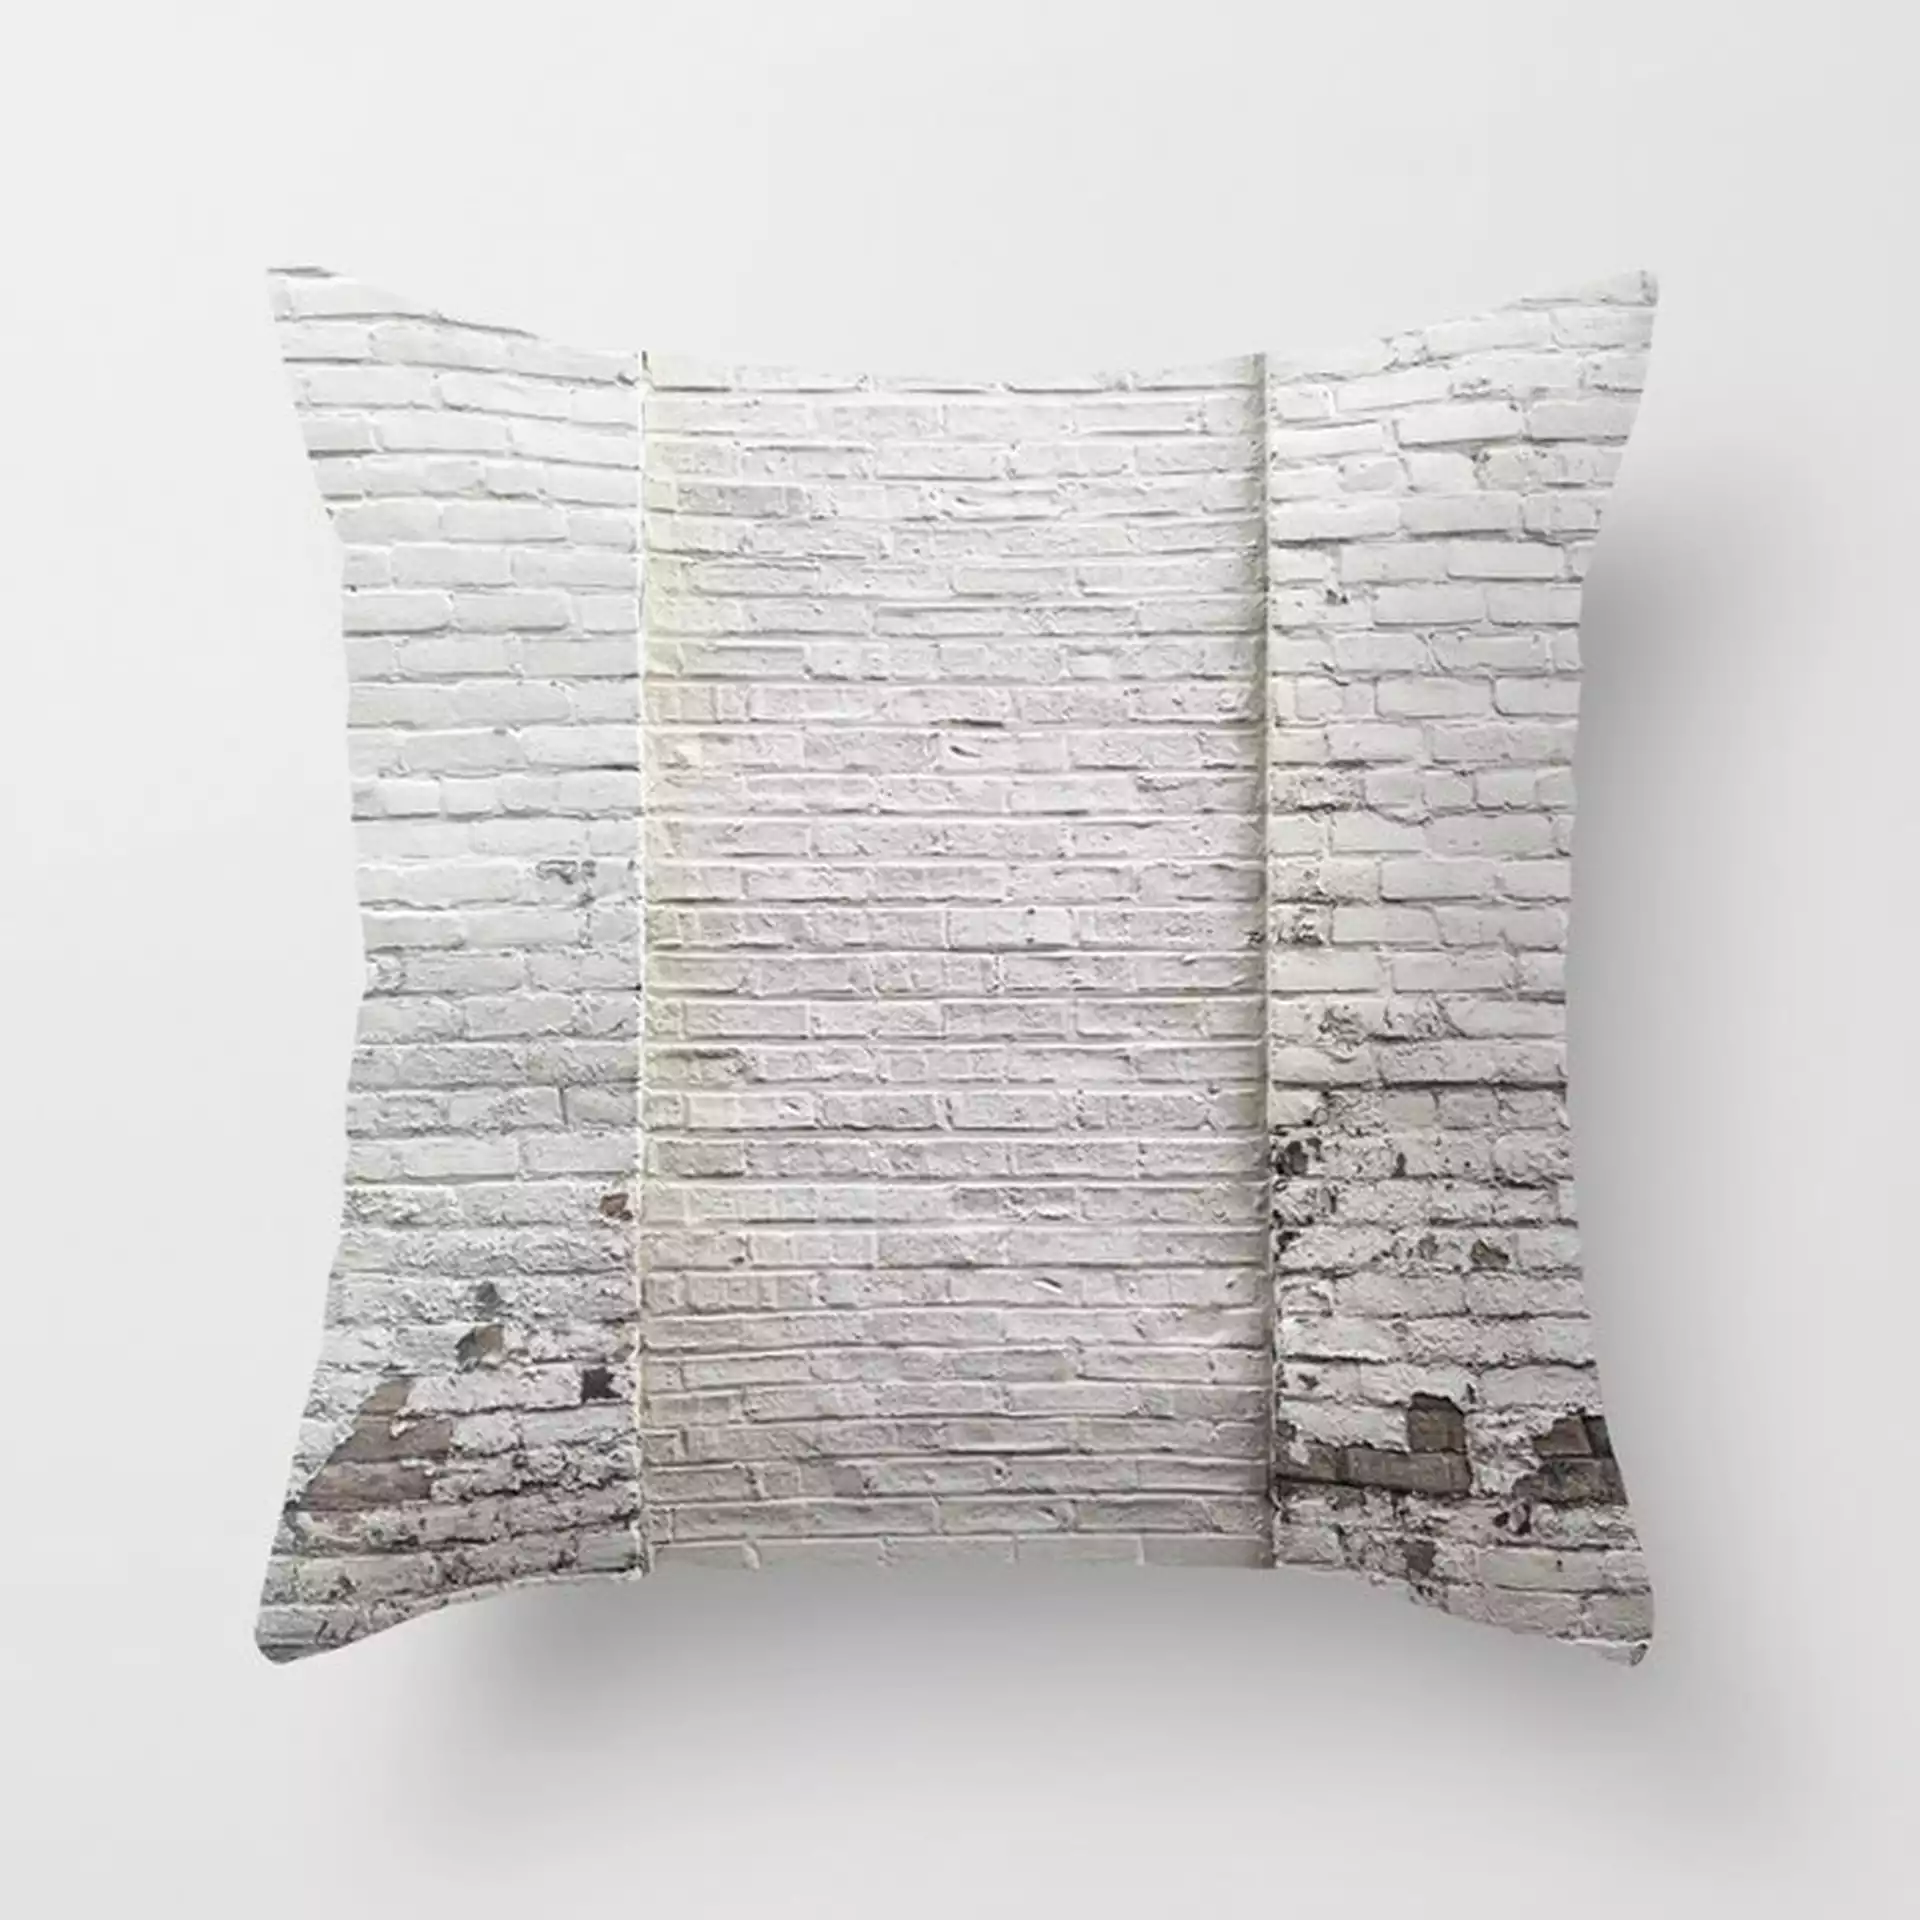 White Brick Wall Door In Wisconsin Couch Throw Pillow by Christina Lynn Williams - Cover (16" x 16") with pillow insert - Indoor Pillow